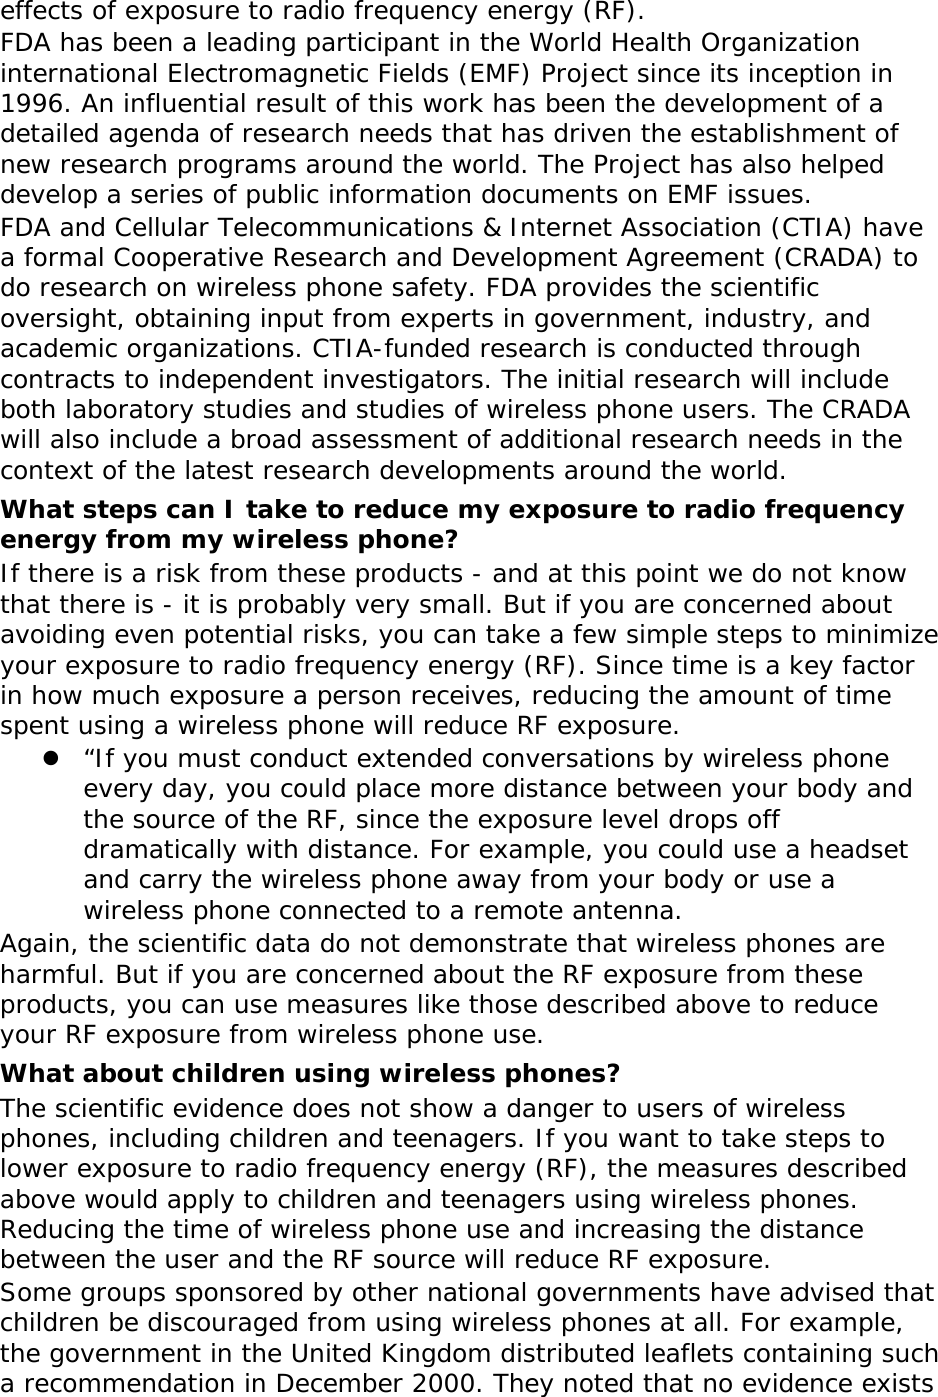 effects of exposure to radio frequency energy (RF). FDA has been a leading participant in the World Health Organization international Electromagnetic Fields (EMF) Project since its inception in 1996. An influential result of this work has been the development of a detailed agenda of research needs that has driven the establishment of new research programs around the world. The Project has also helped develop a series of public information documents on EMF issues. FDA and Cellular Telecommunications &amp; Internet Association (CTIA) have a formal Cooperative Research and Development Agreement (CRADA) to do research on wireless phone safety. FDA provides the scientific oversight, obtaining input from experts in government, industry, and academic organizations. CTIA-funded research is conducted through contracts to independent investigators. The initial research will include both laboratory studies and studies of wireless phone users. The CRADA will also include a broad assessment of additional research needs in the context of the latest research developments around the world. What steps can I take to reduce my exposure to radio frequency energy from my wireless phone? If there is a risk from these products - and at this point we do not know that there is - it is probably very small. But if you are concerned about avoiding even potential risks, you can take a few simple steps to minimize your exposure to radio frequency energy (RF). Since time is a key factor in how much exposure a person receives, reducing the amount of time spent using a wireless phone will reduce RF exposure.  “If you must conduct extended conversations by wireless phone every day, you could place more distance between your body and the source of the RF, since the exposure level drops off dramatically with distance. For example, you could use a headset and carry the wireless phone away from your body or use a wireless phone connected to a remote antenna. Again, the scientific data do not demonstrate that wireless phones are harmful. But if you are concerned about the RF exposure from these products, you can use measures like those described above to reduce your RF exposure from wireless phone use. What about children using wireless phones? The scientific evidence does not show a danger to users of wireless phones, including children and teenagers. If you want to take steps to lower exposure to radio frequency energy (RF), the measures described above would apply to children and teenagers using wireless phones. Reducing the time of wireless phone use and increasing the distance between the user and the RF source will reduce RF exposure. Some groups sponsored by other national governments have advised that children be discouraged from using wireless phones at all. For example, the government in the United Kingdom distributed leaflets containing such a recommendation in December 2000. They noted that no evidence exists 